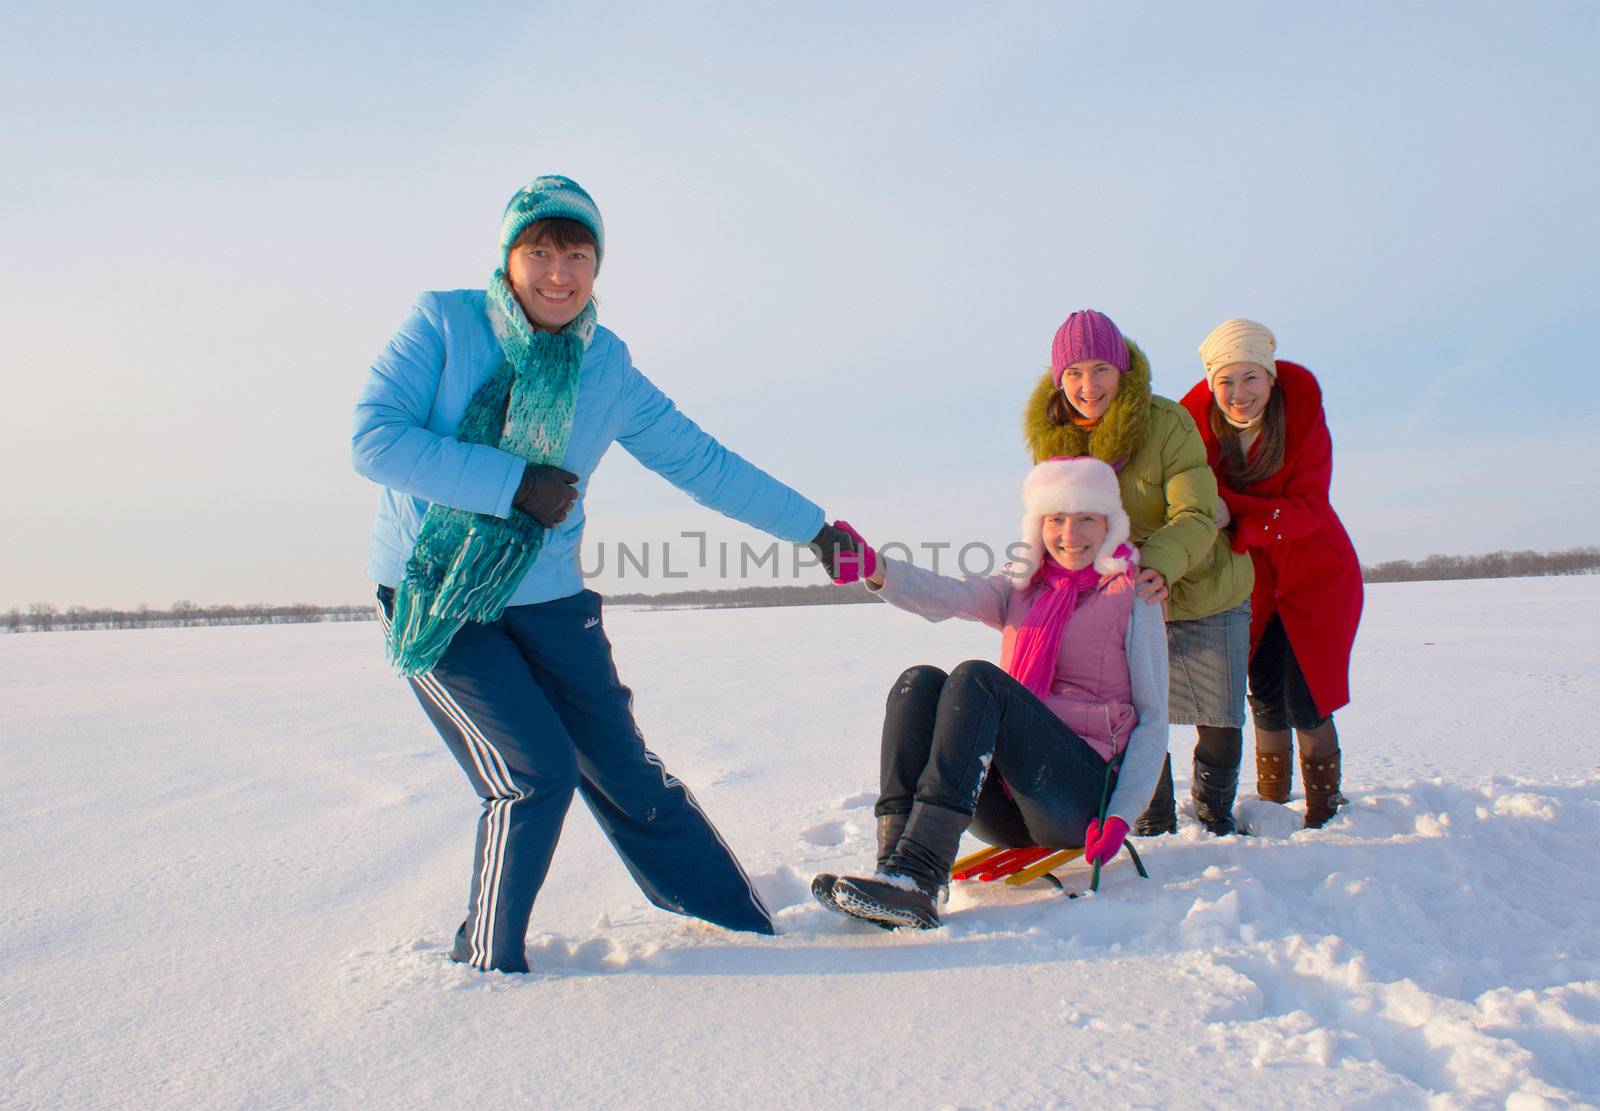 Four happy ladies sledding at winter time by AndreyKr